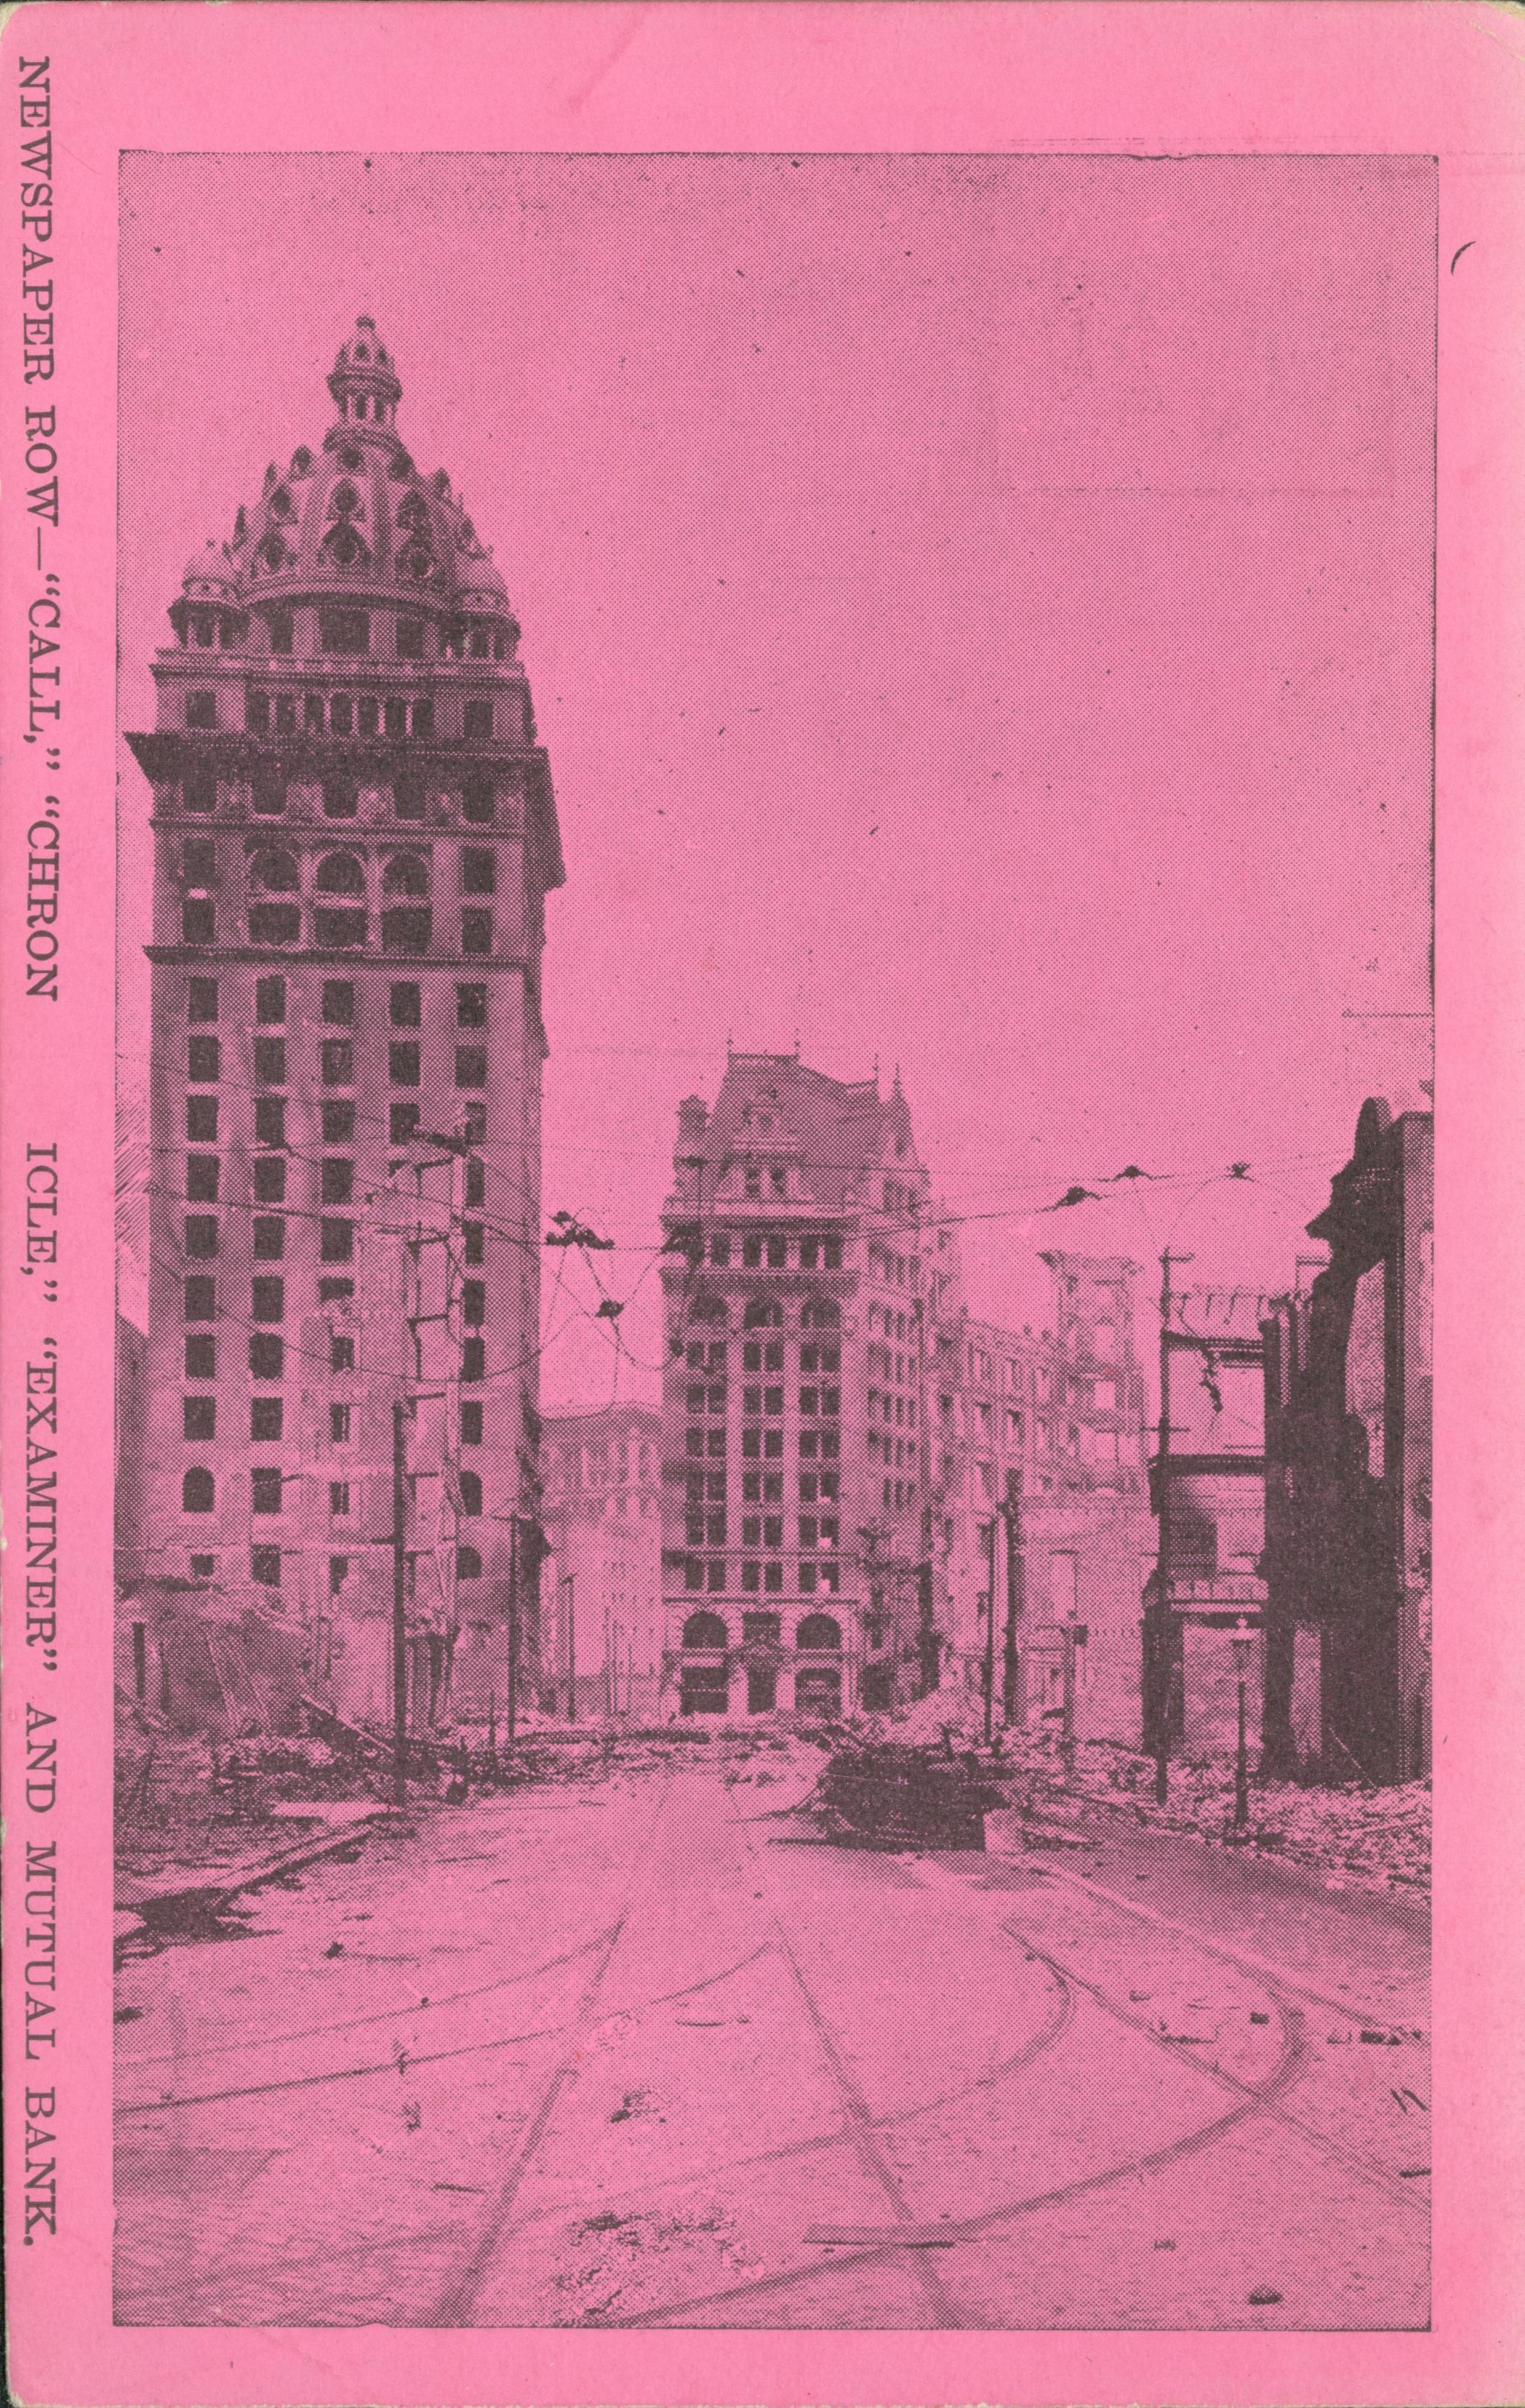 Shows several buildings standing surrounded by rubble of fallen buildings. Black and White image printed on pink paper.